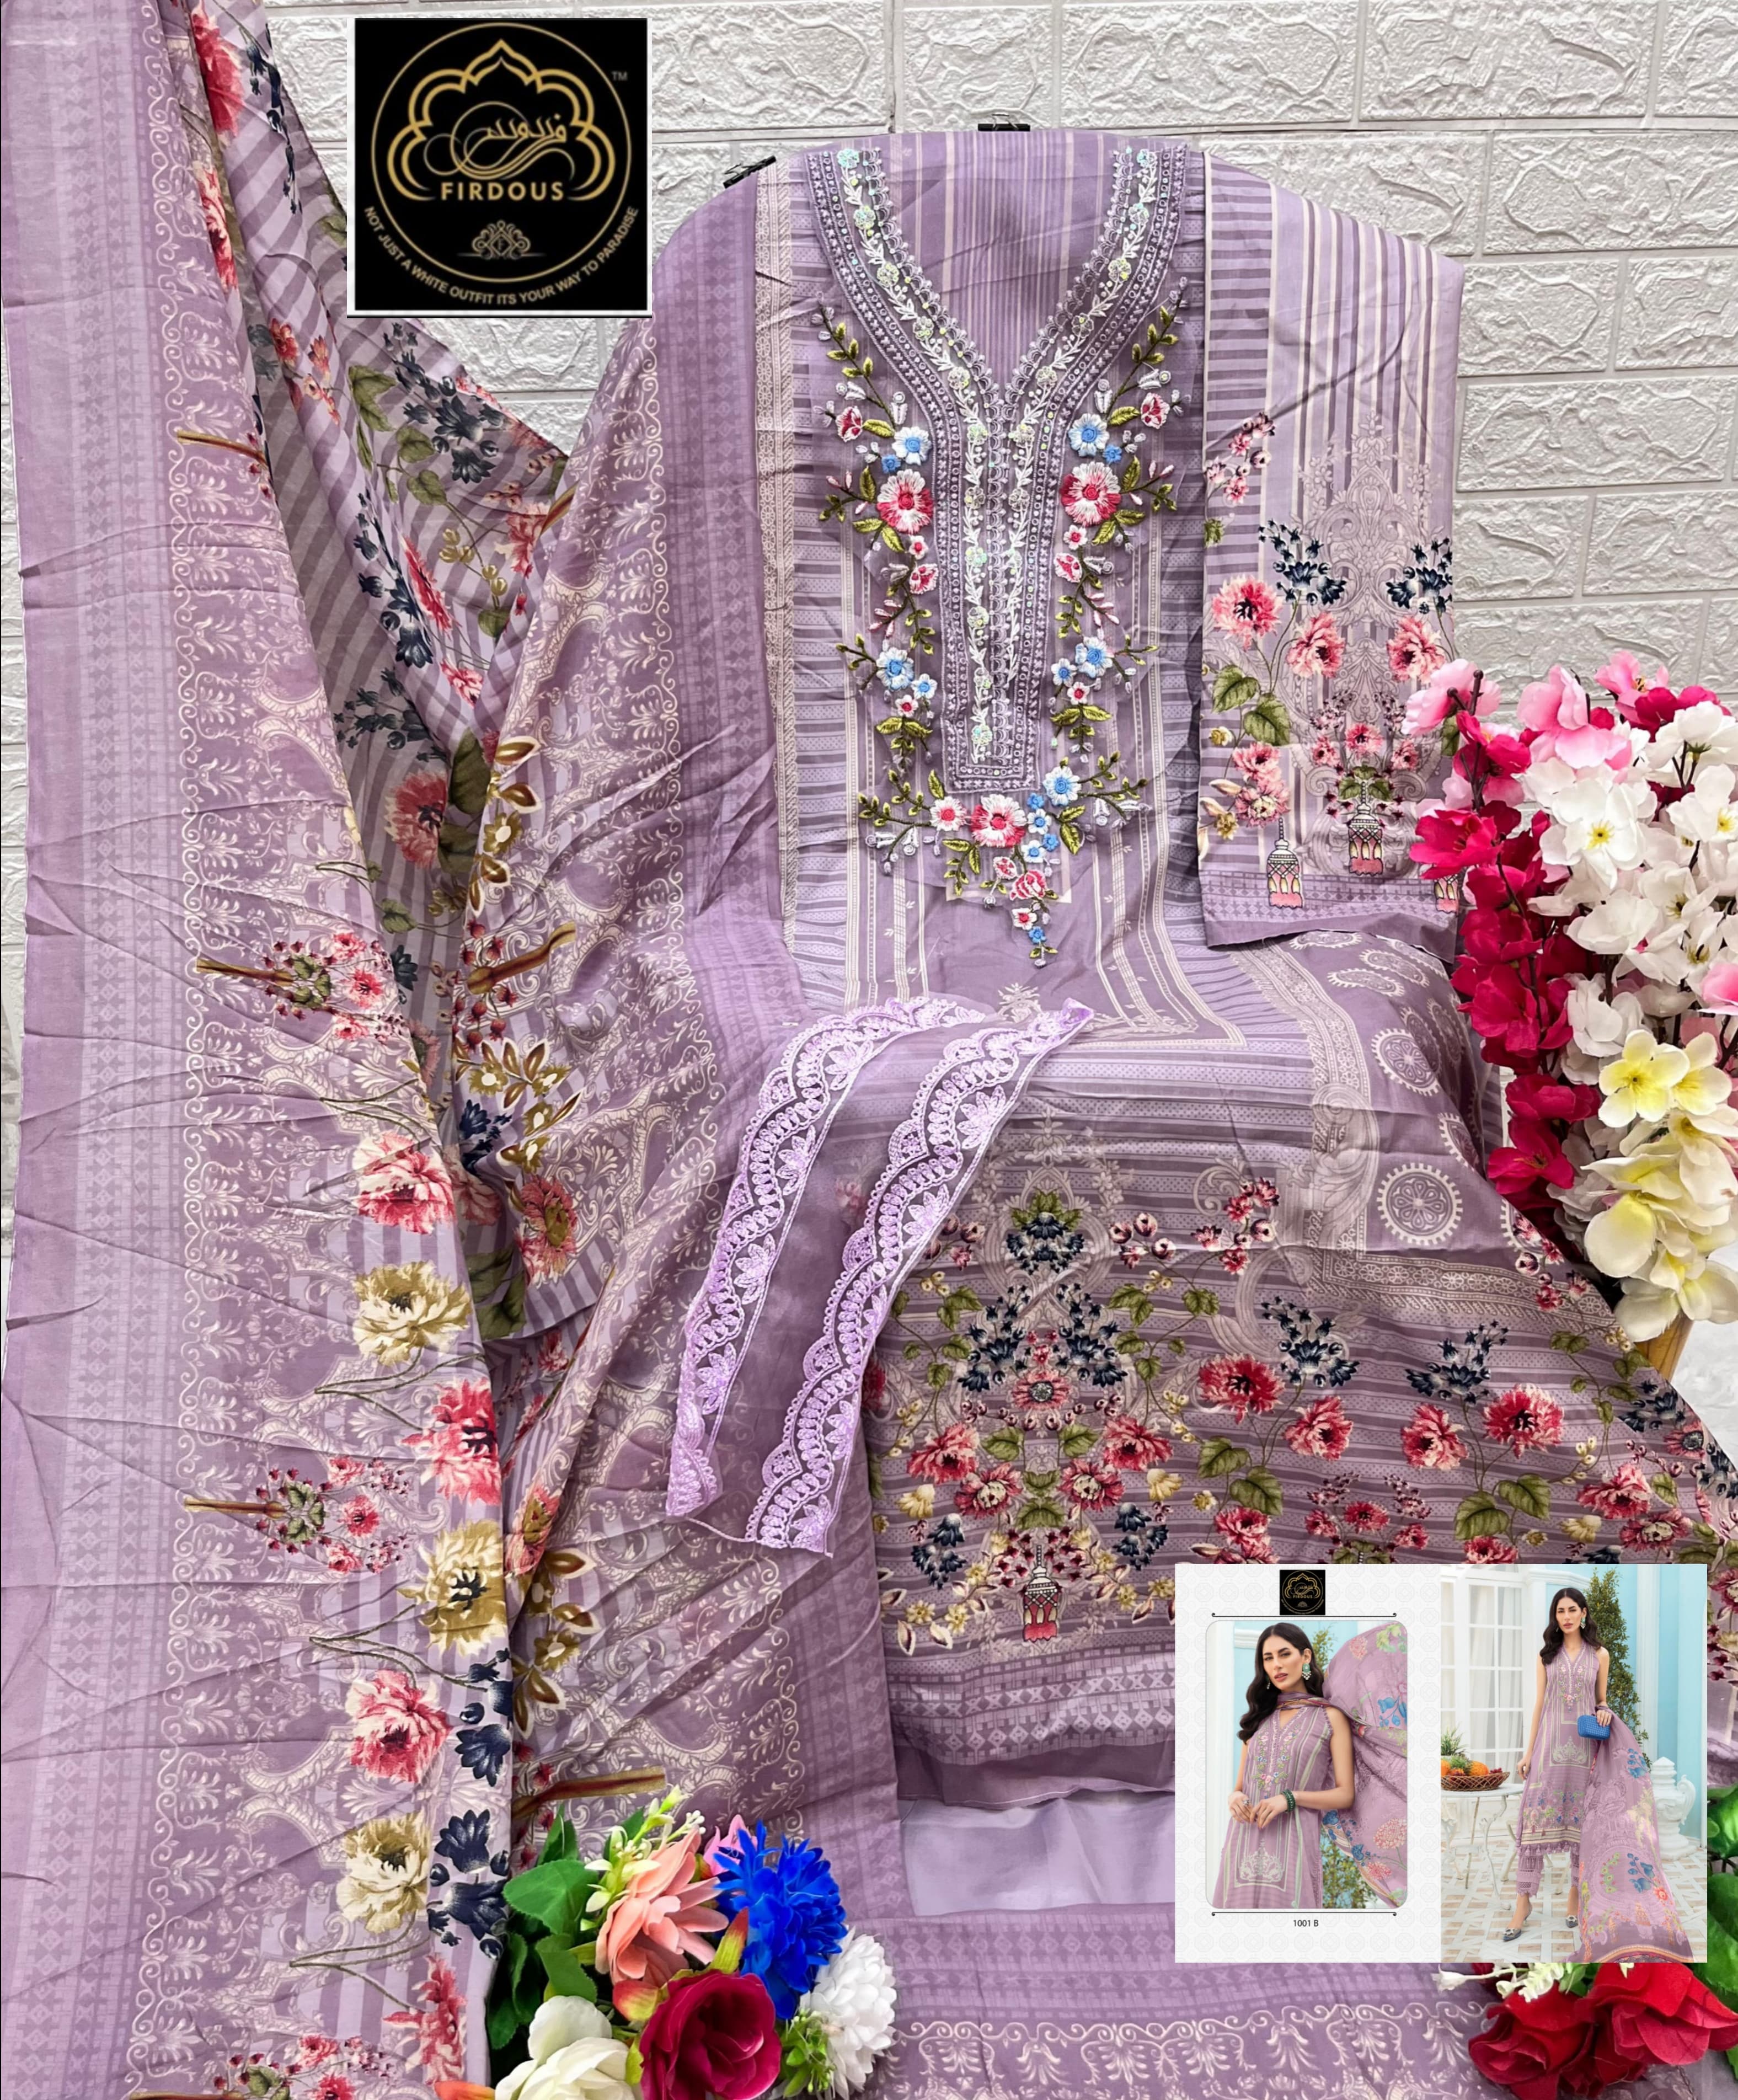 Firdous maria.b. vol 1 cotton printed with embroidery work Cotton dupatta pakistani suits online in india - jilaniwholesalesuit